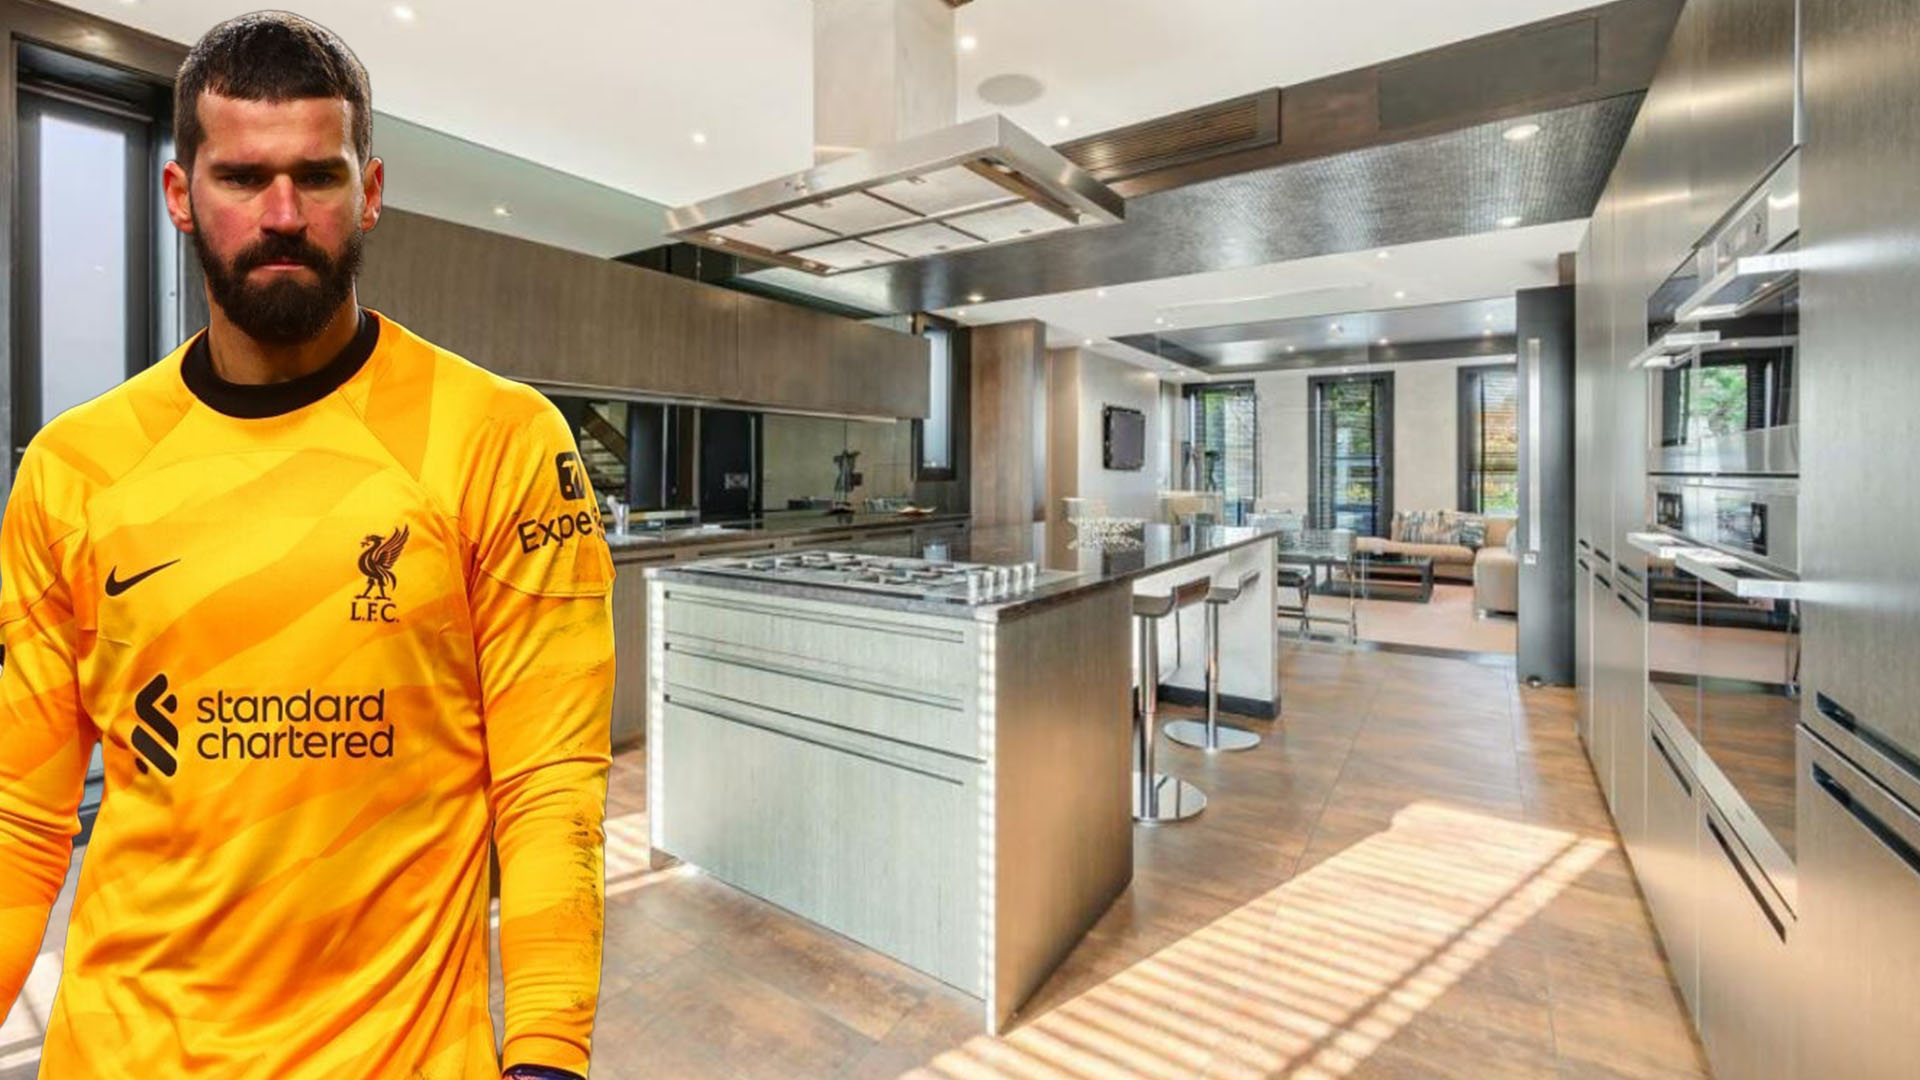 Liverpool star Alisson’s 4.75m home on the market amid fears goalkeeper could follow Jurgen Klopp out the door [Video]